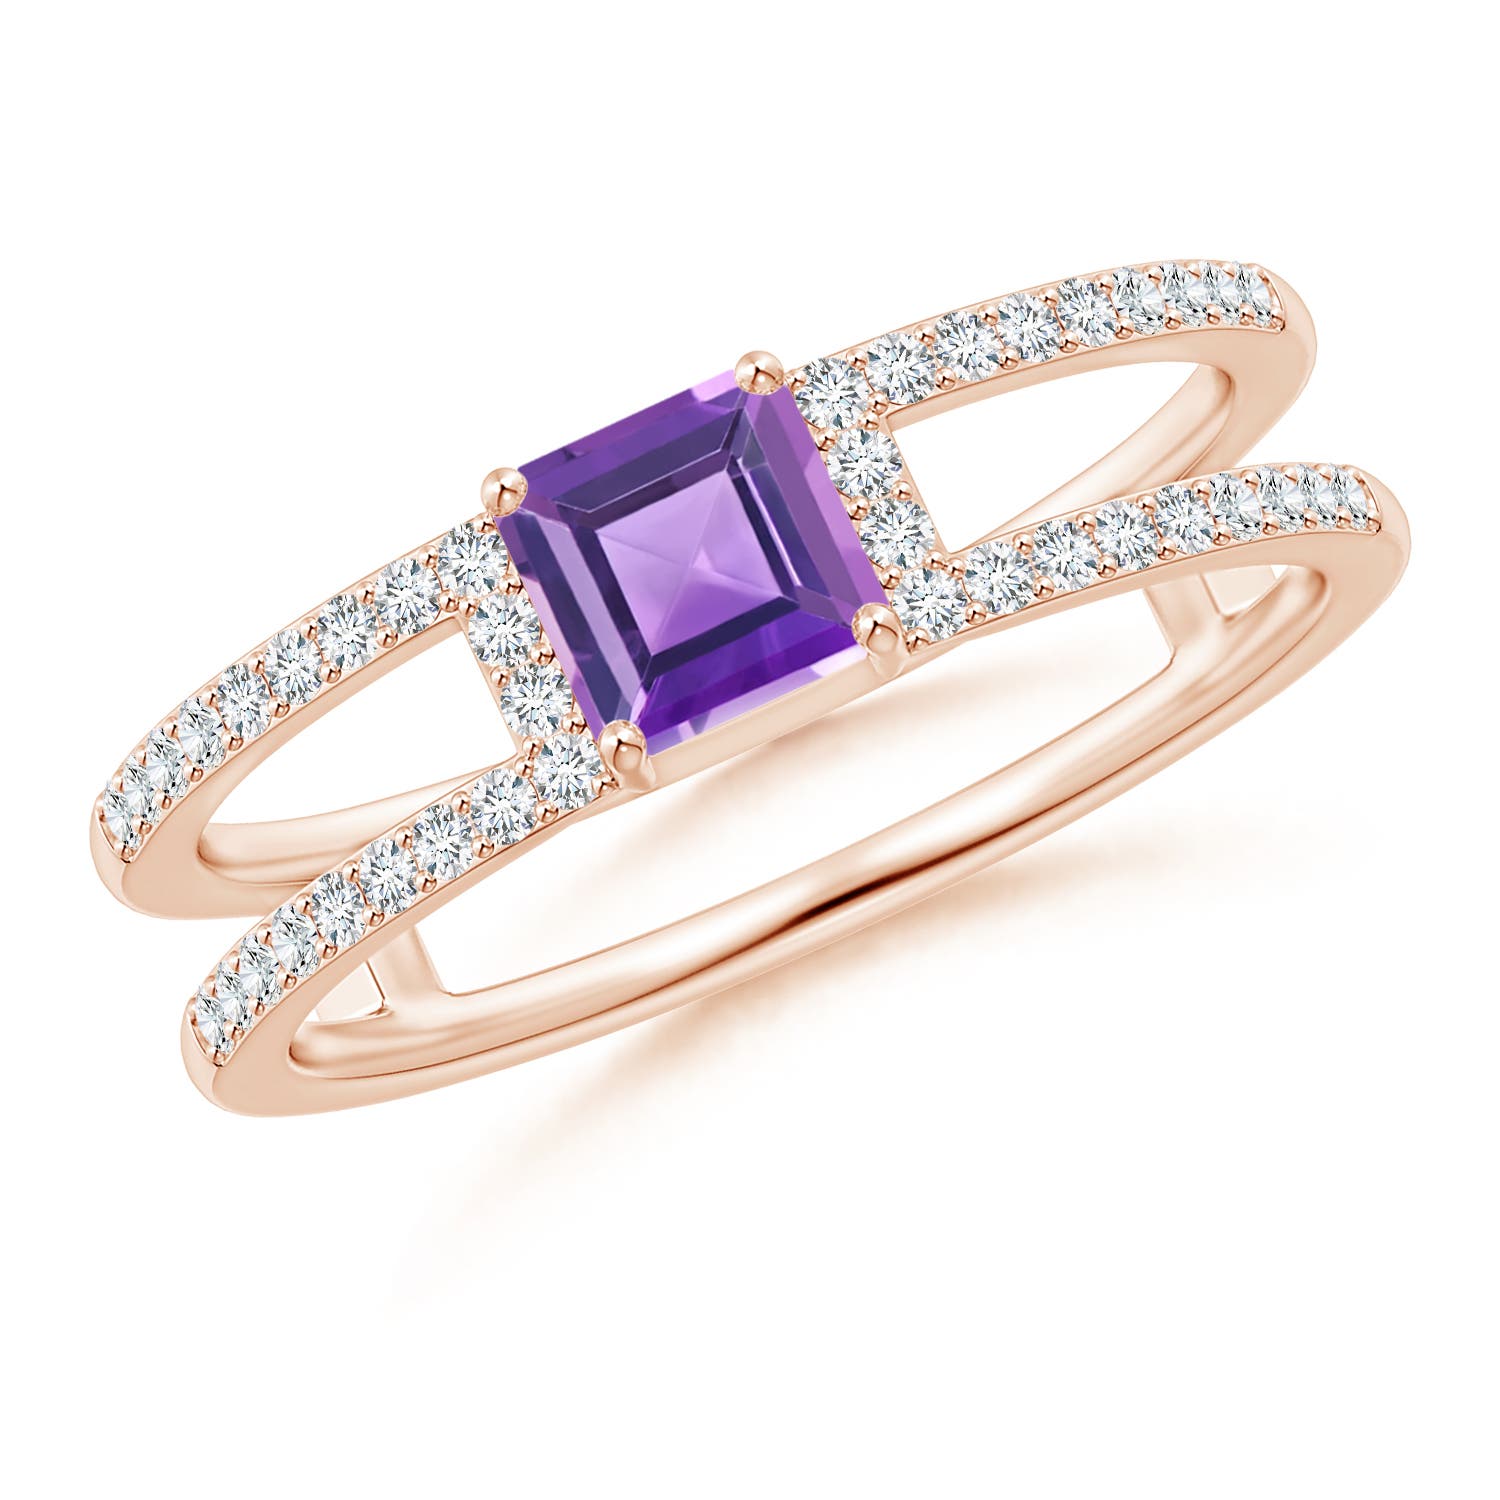 AA - Amethyst / 0.94 CT / 14 KT Rose Gold